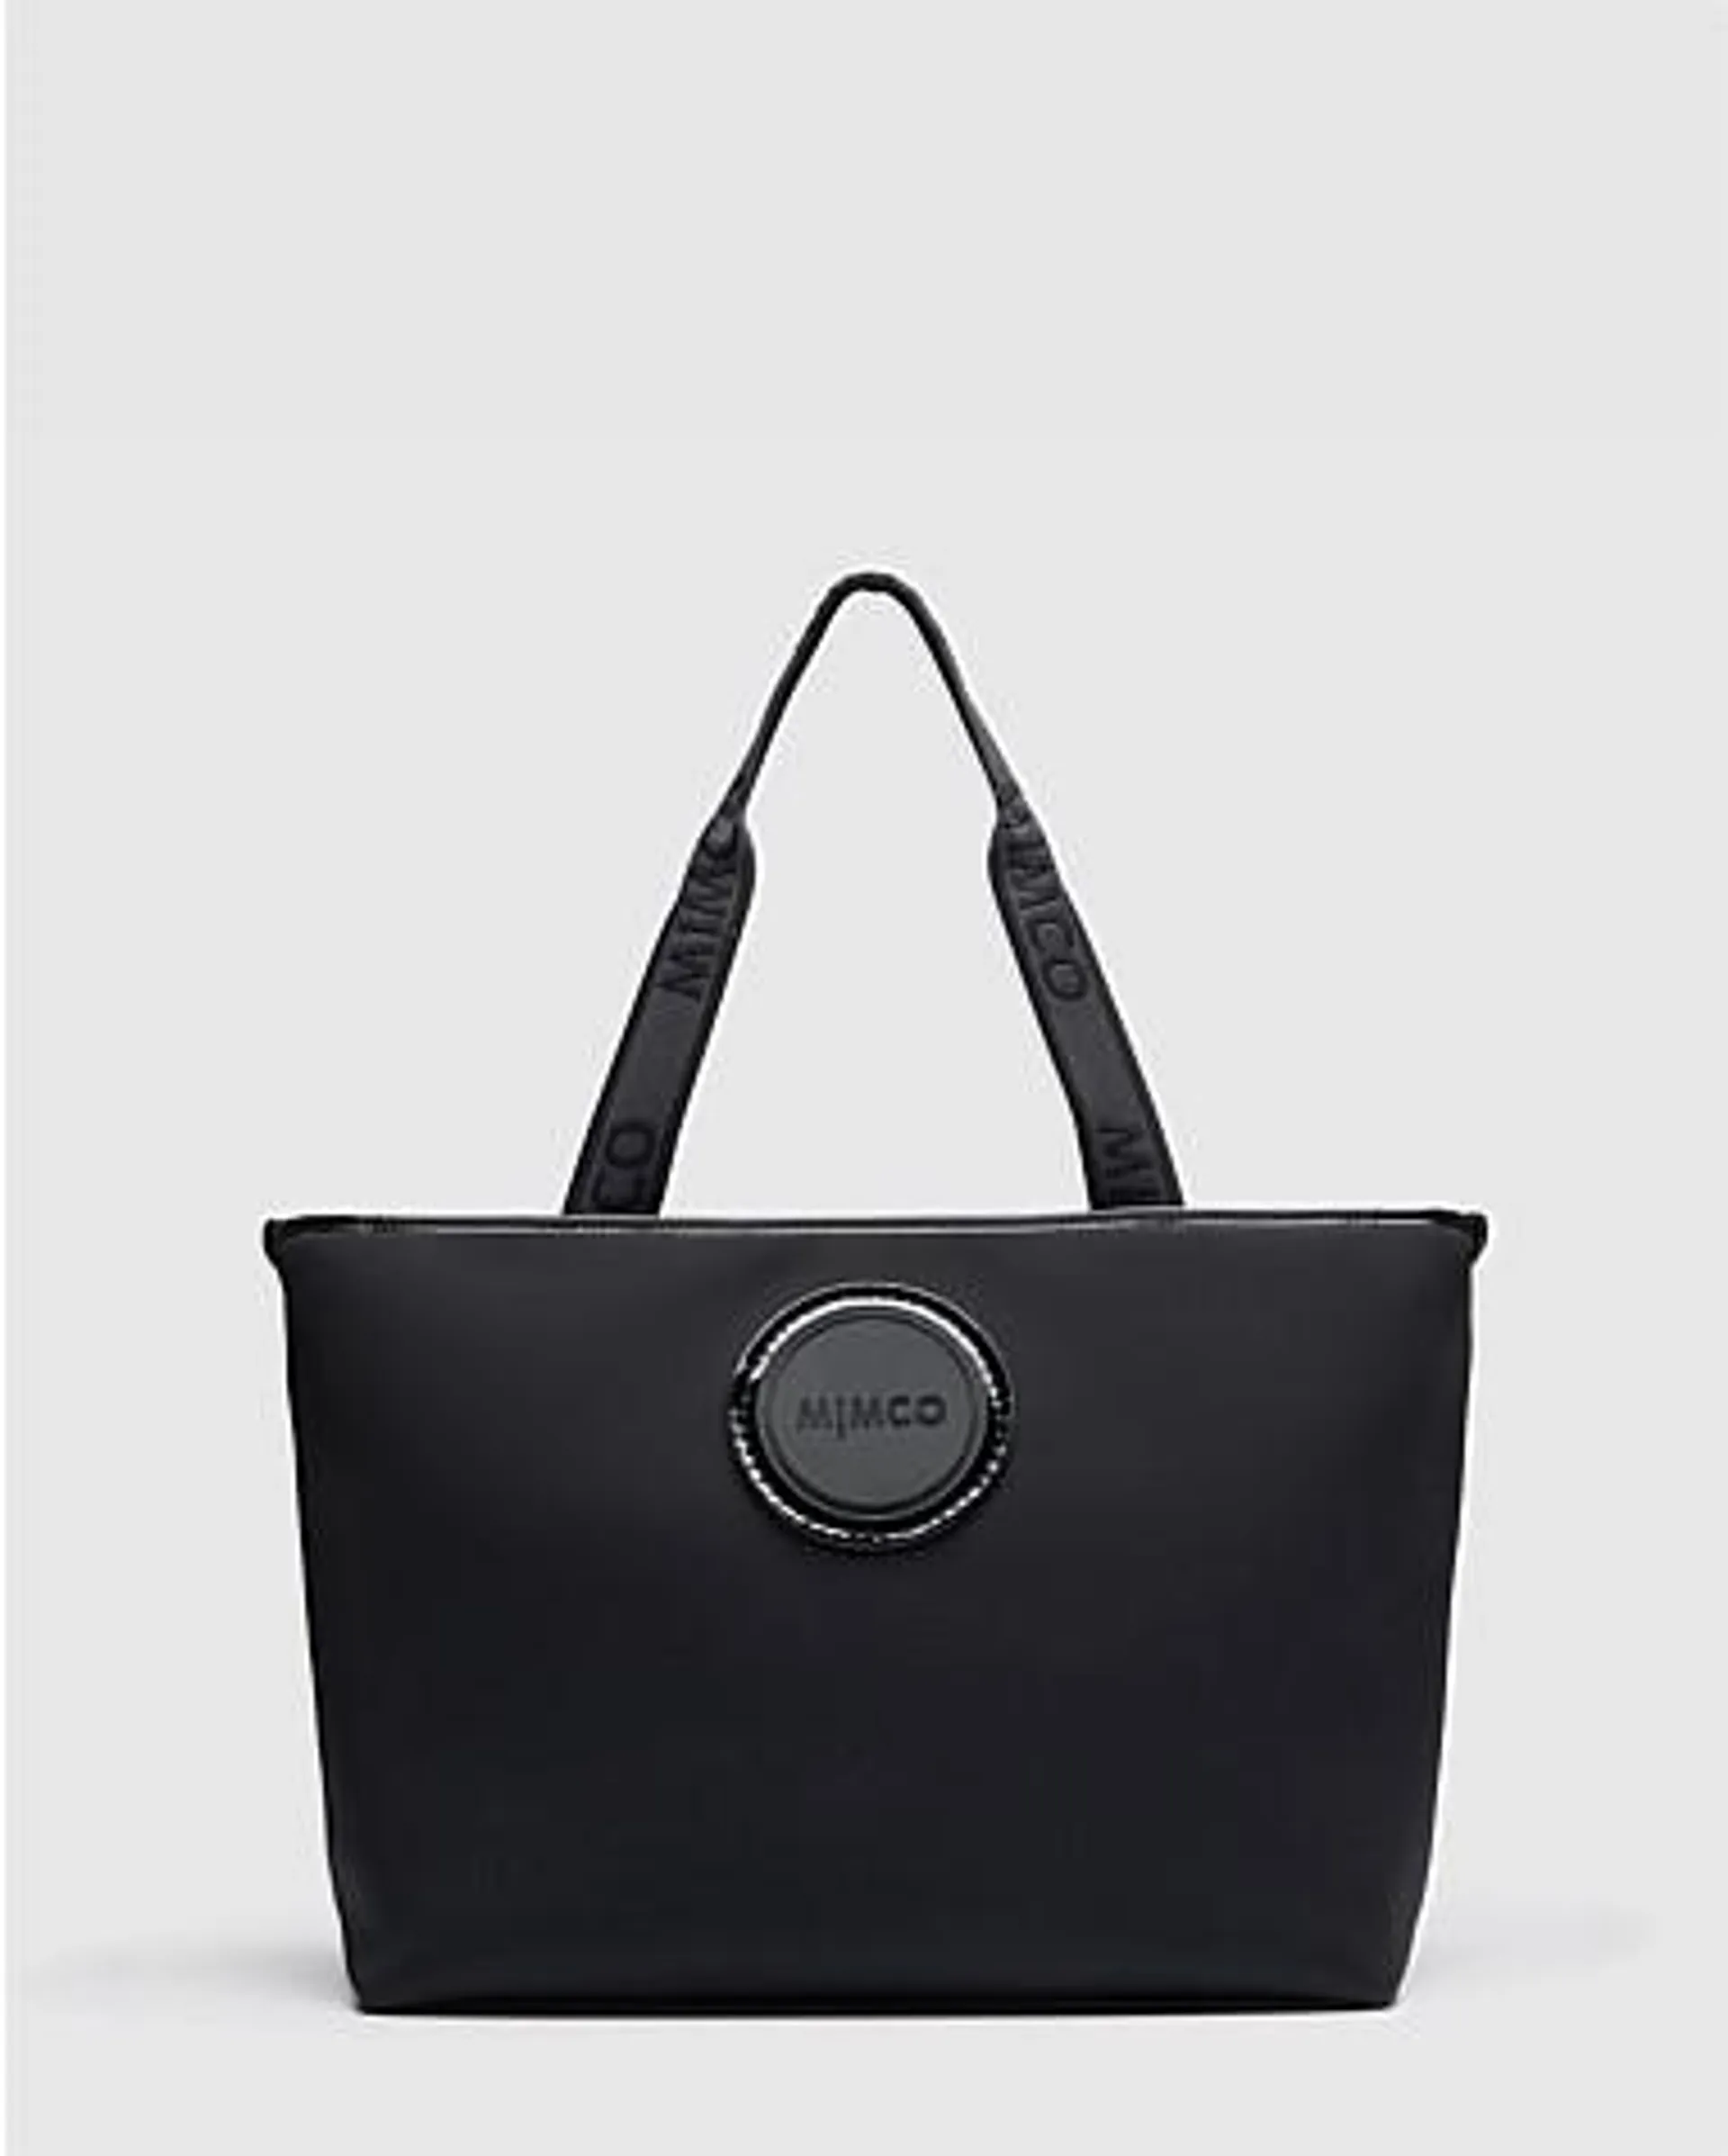 Serenity Carry All Tote Bag